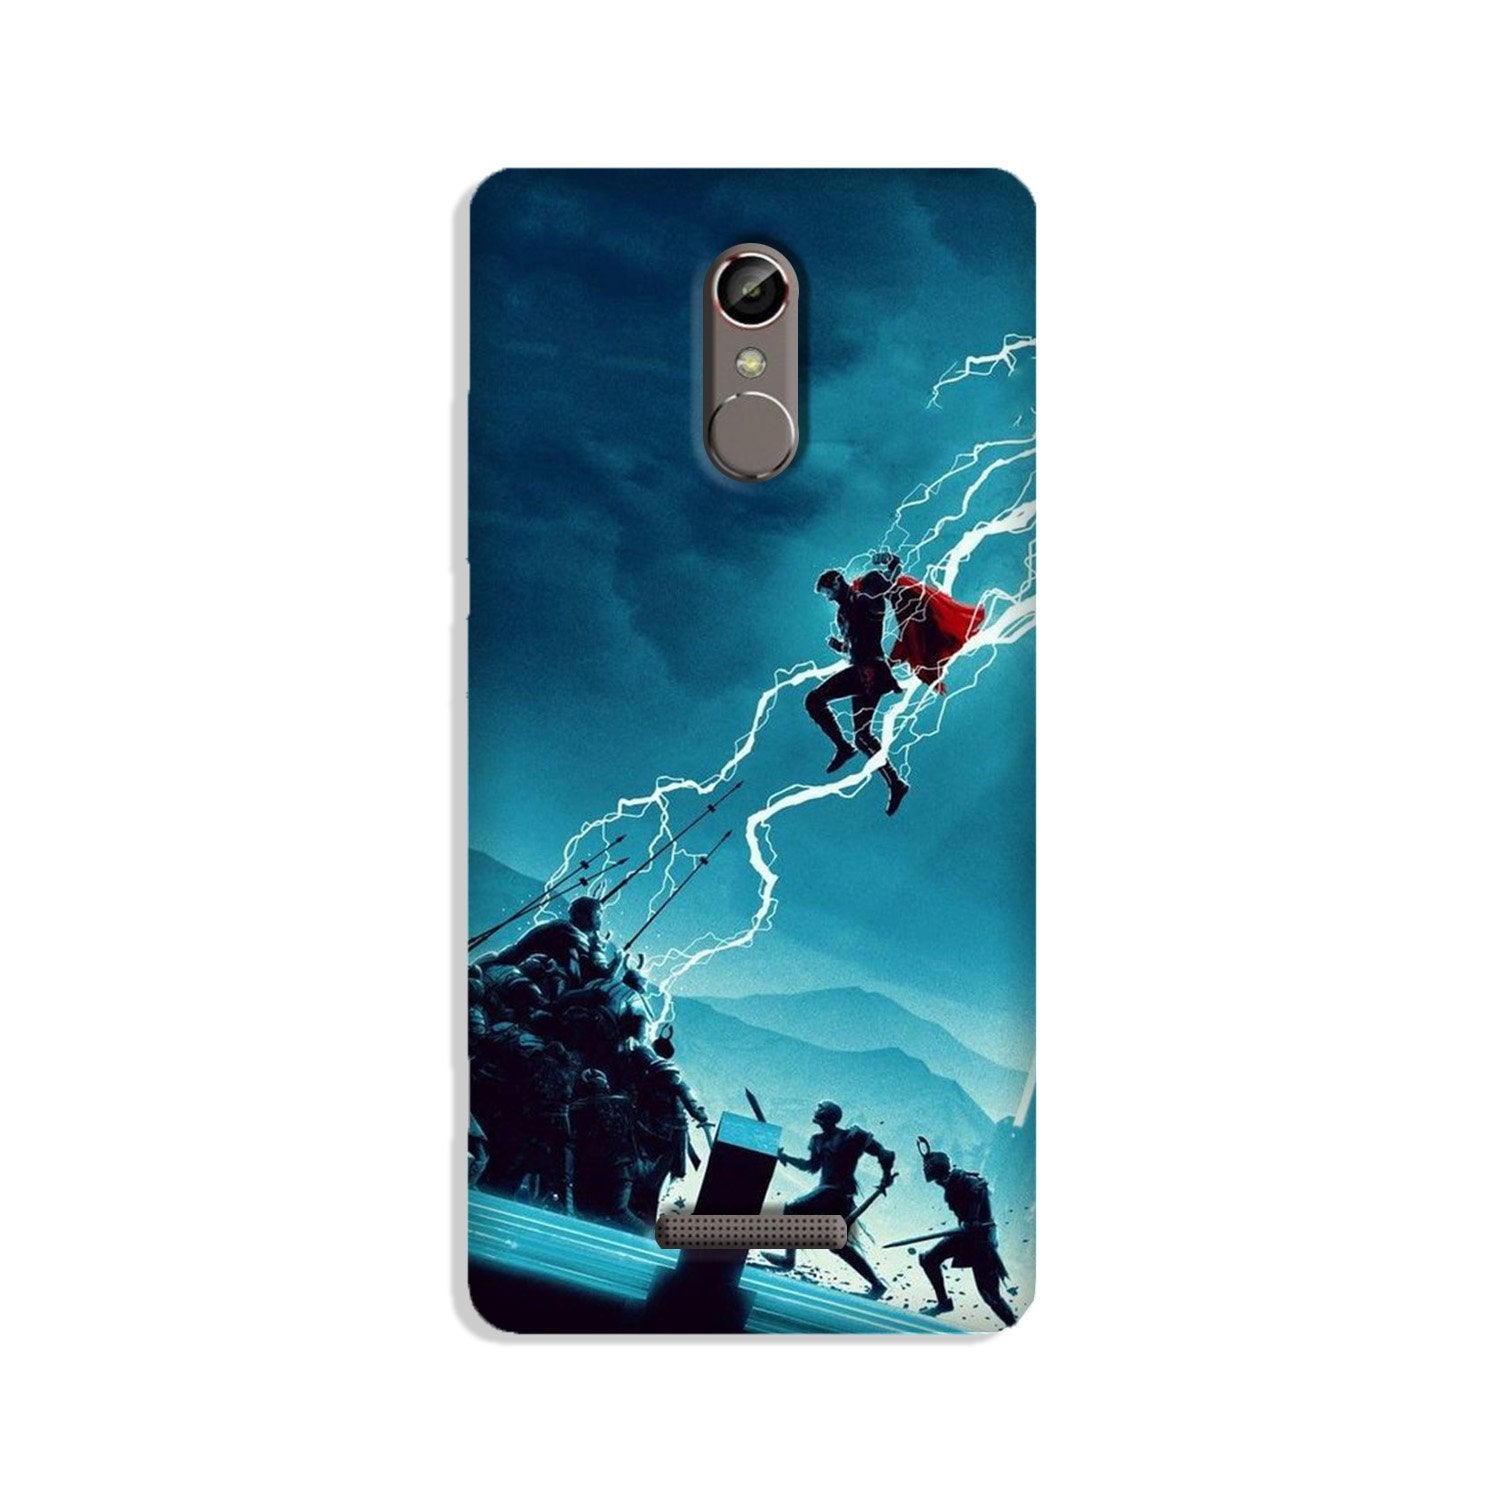 Thor Avengers Case for Gionee S6s (Design No. 243)